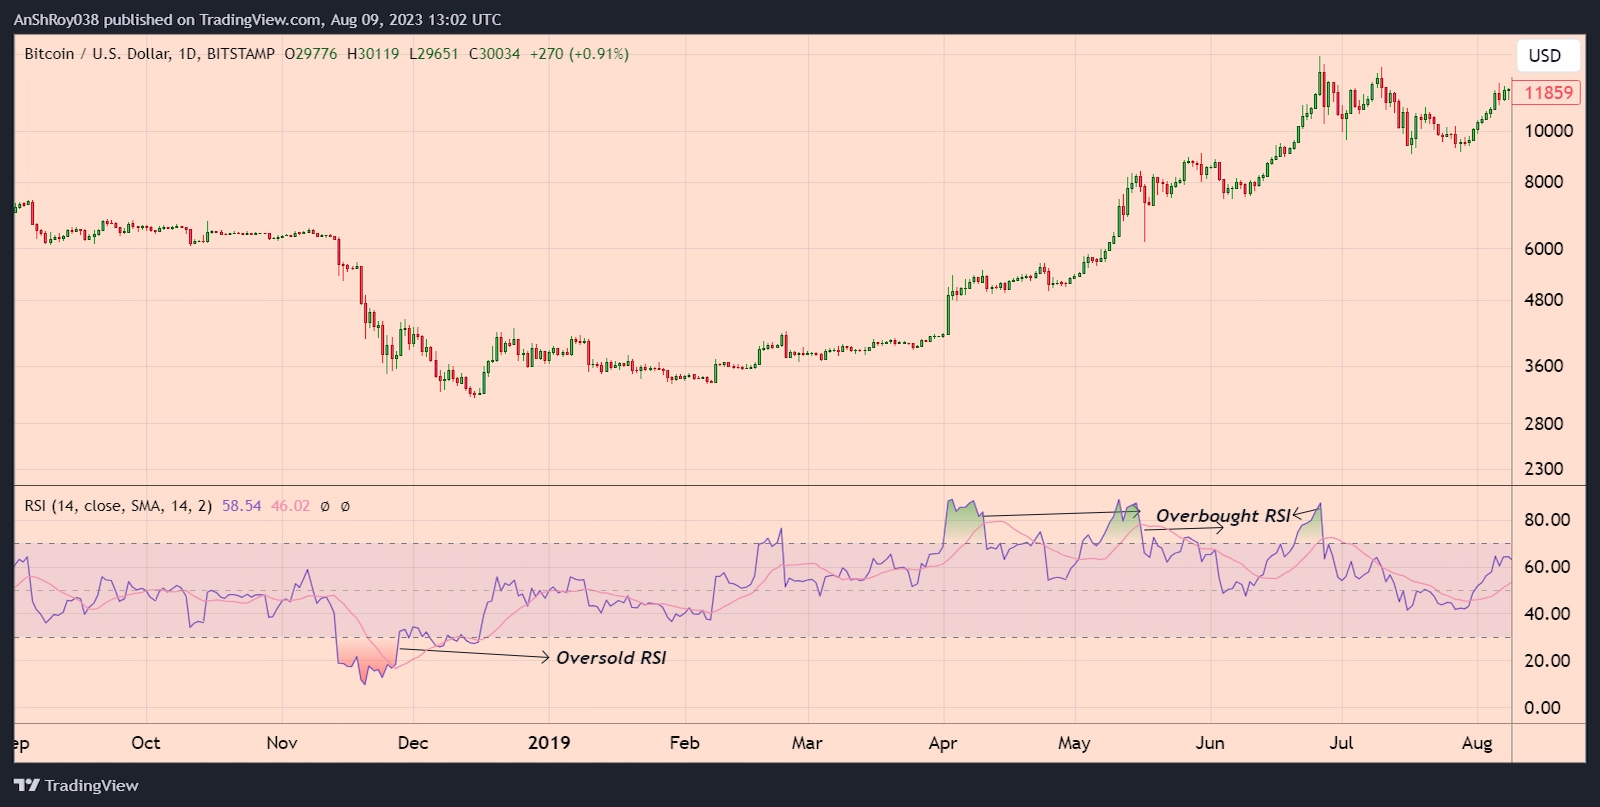 Overbought and oversold RSI levels for BTC on the daily chart.